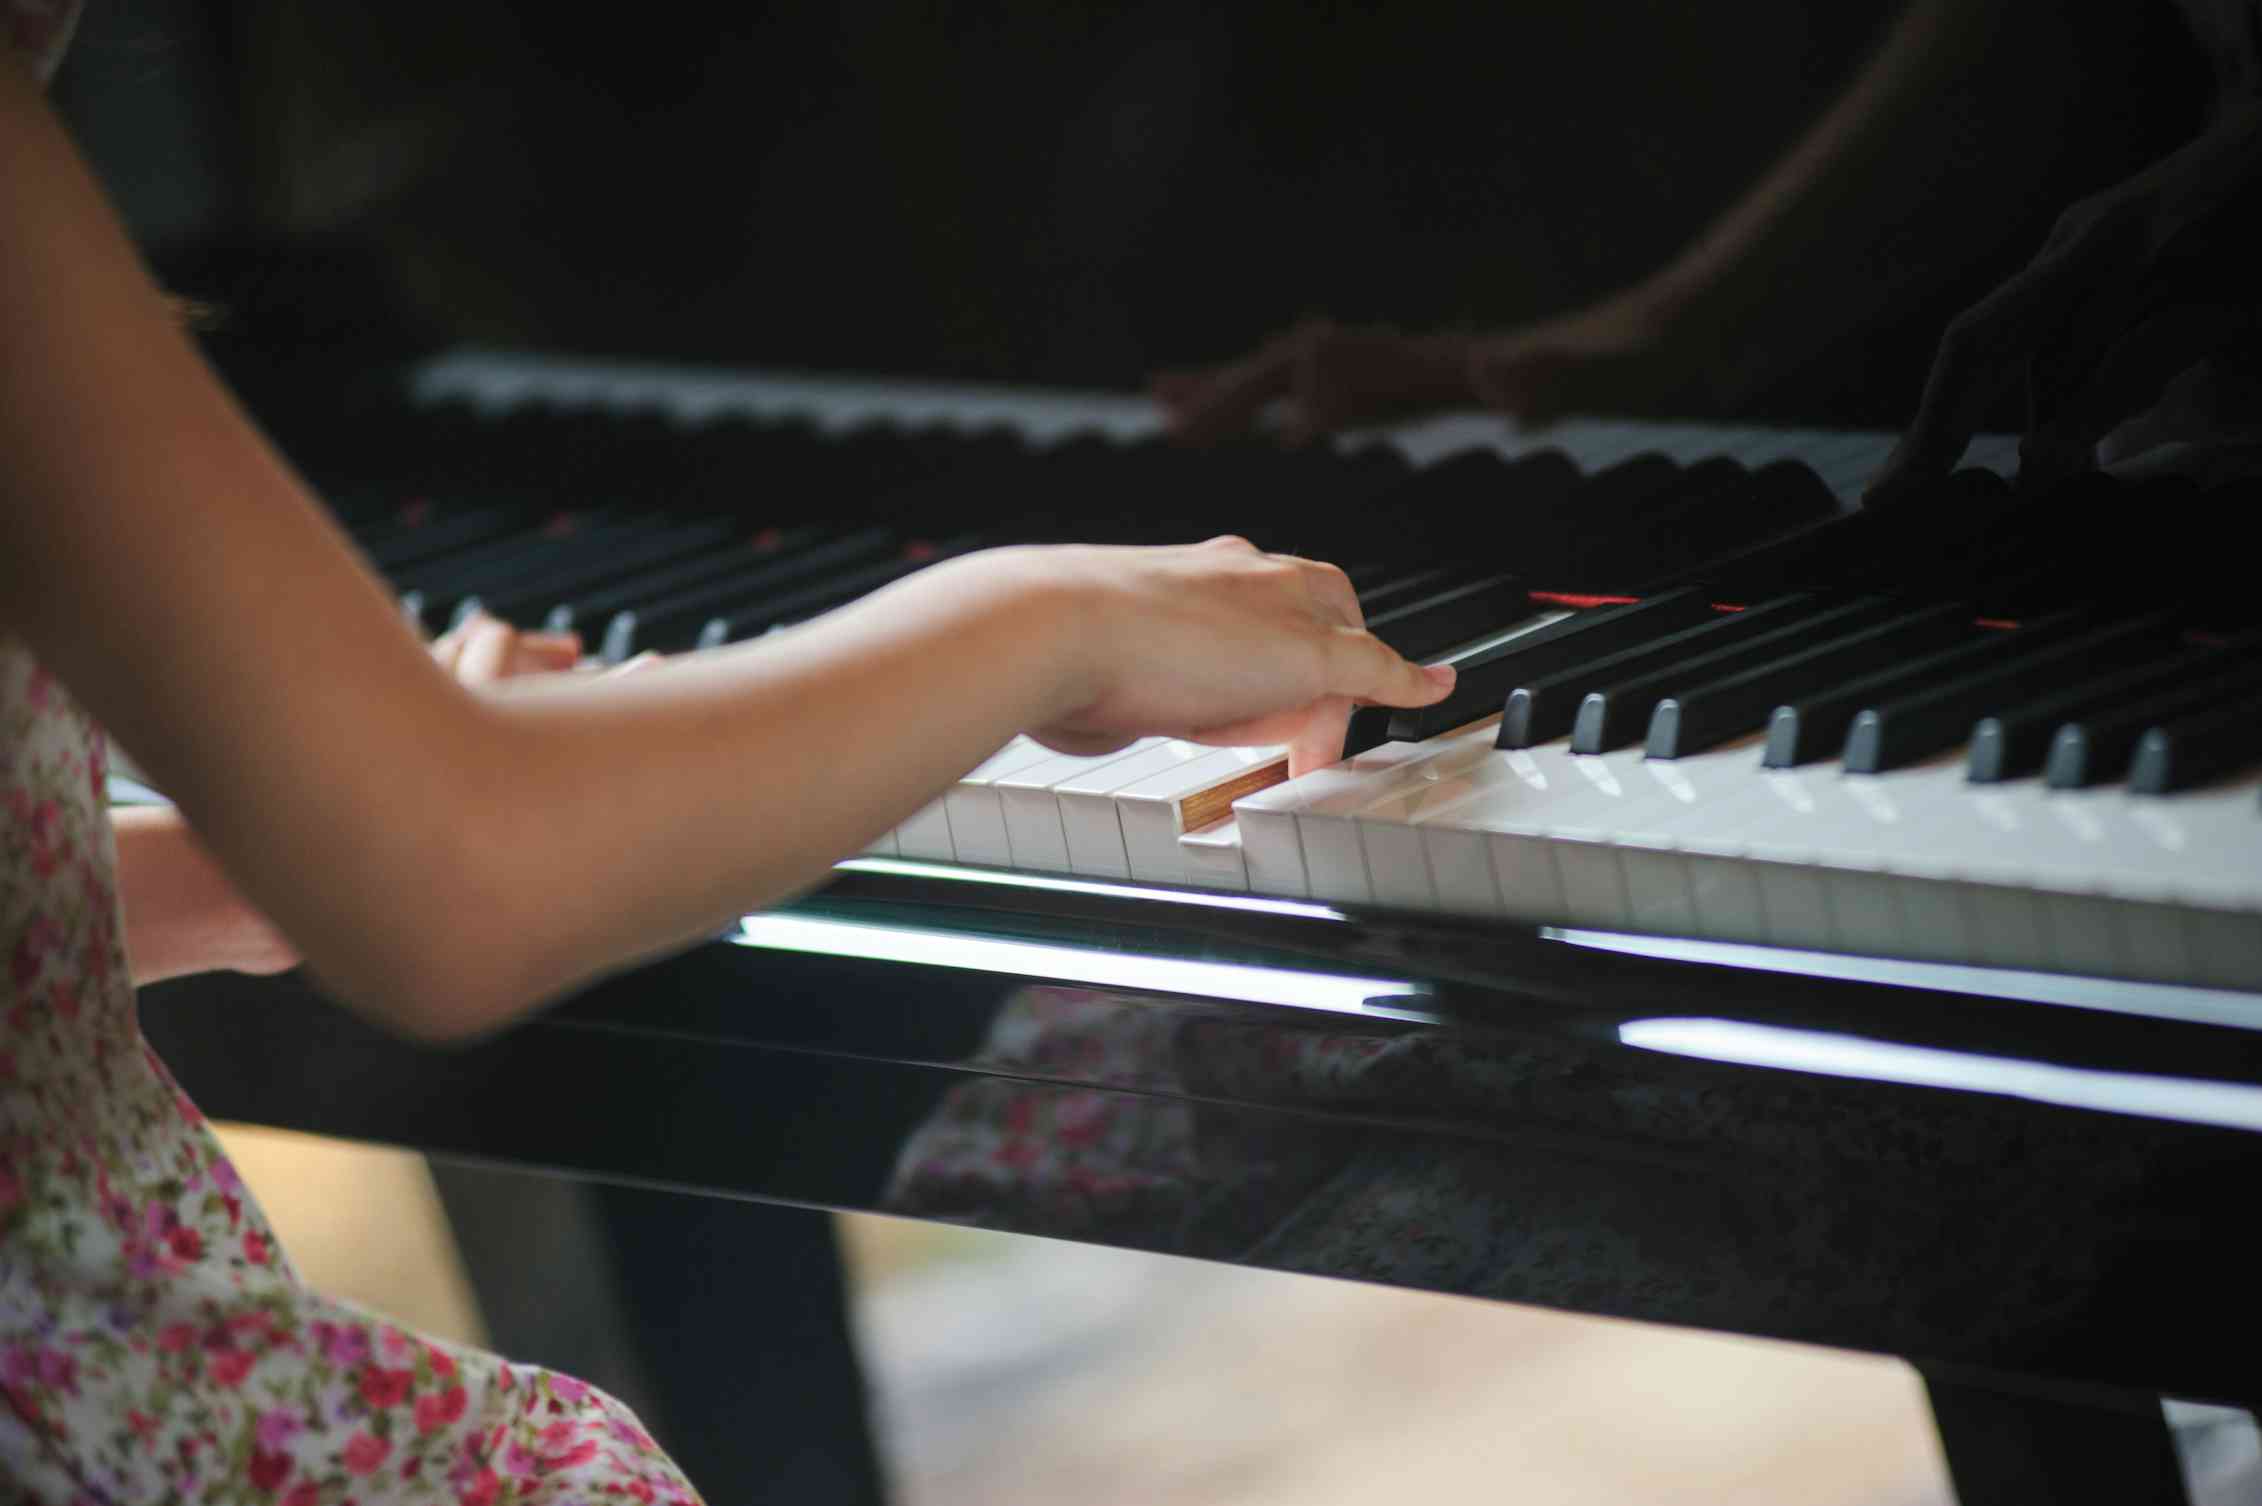 A child's hands on a piano.